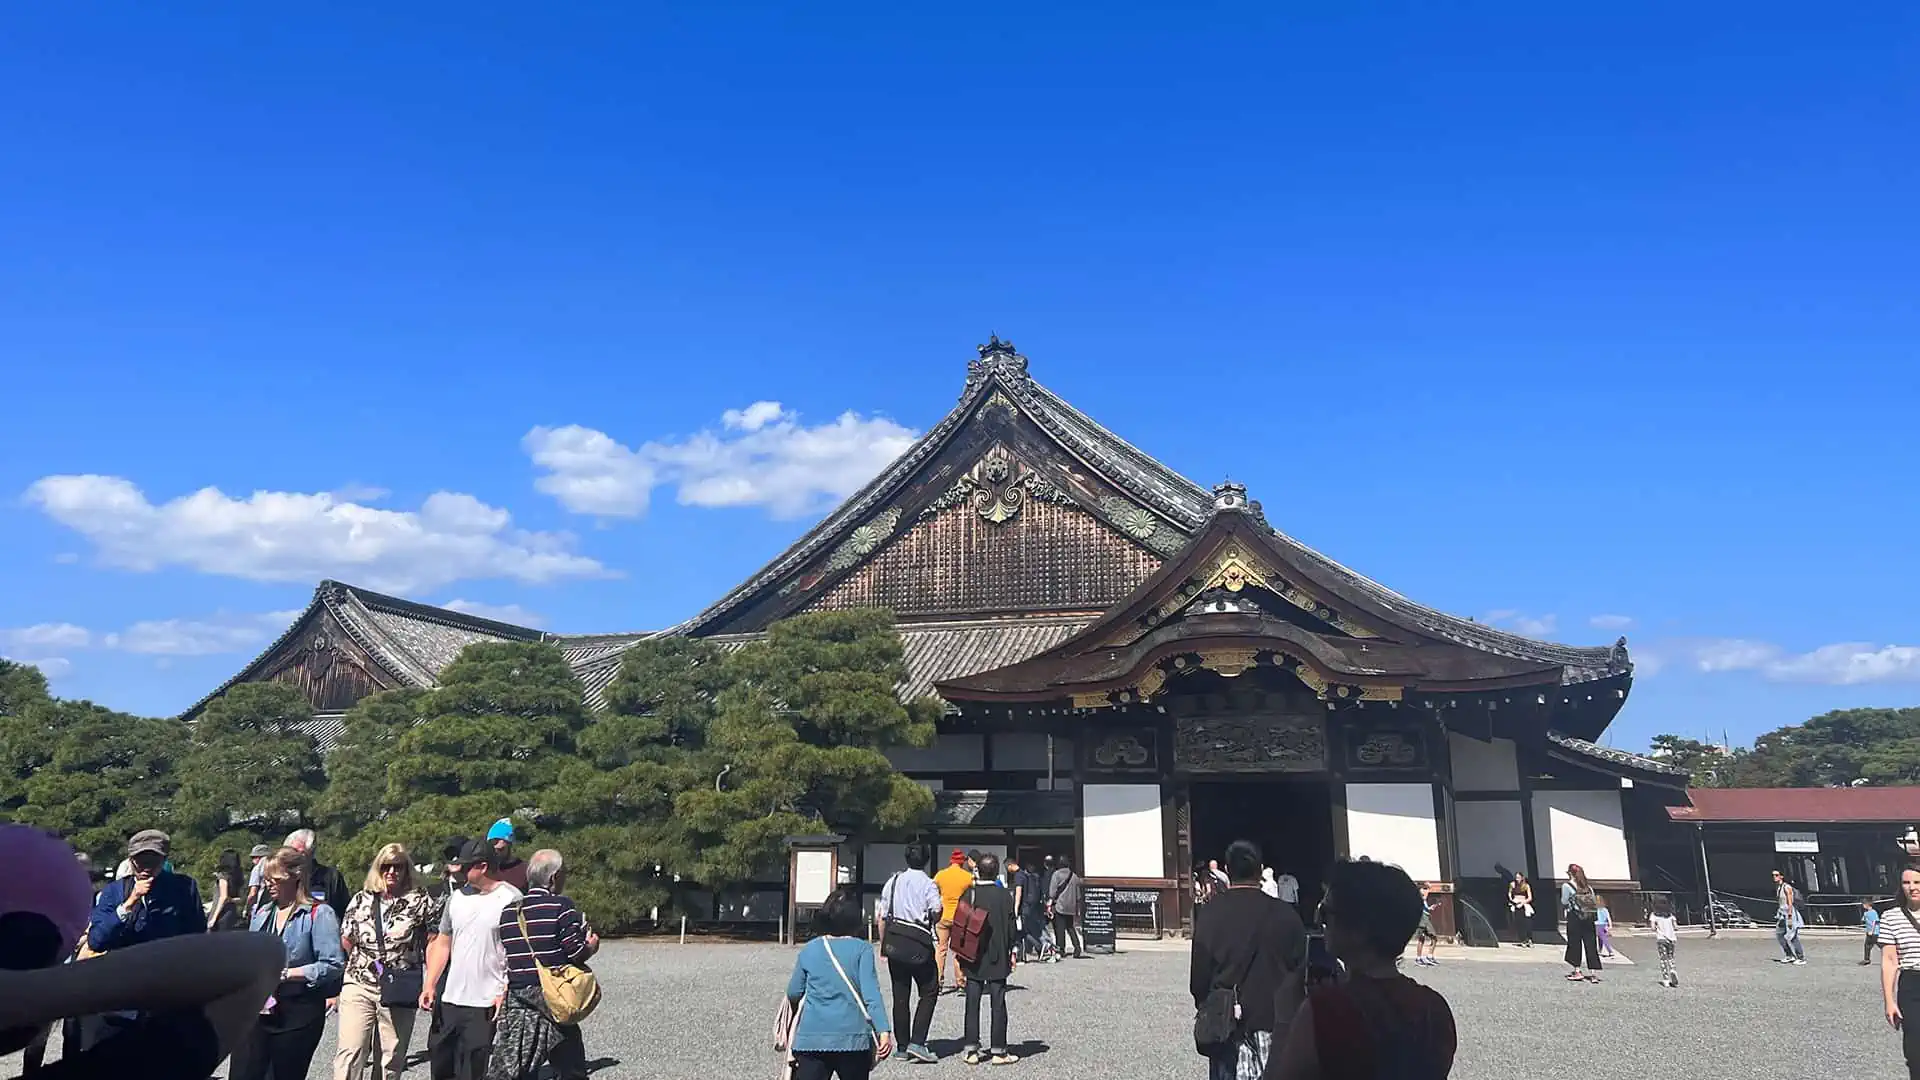 View of front of Nijo Castle